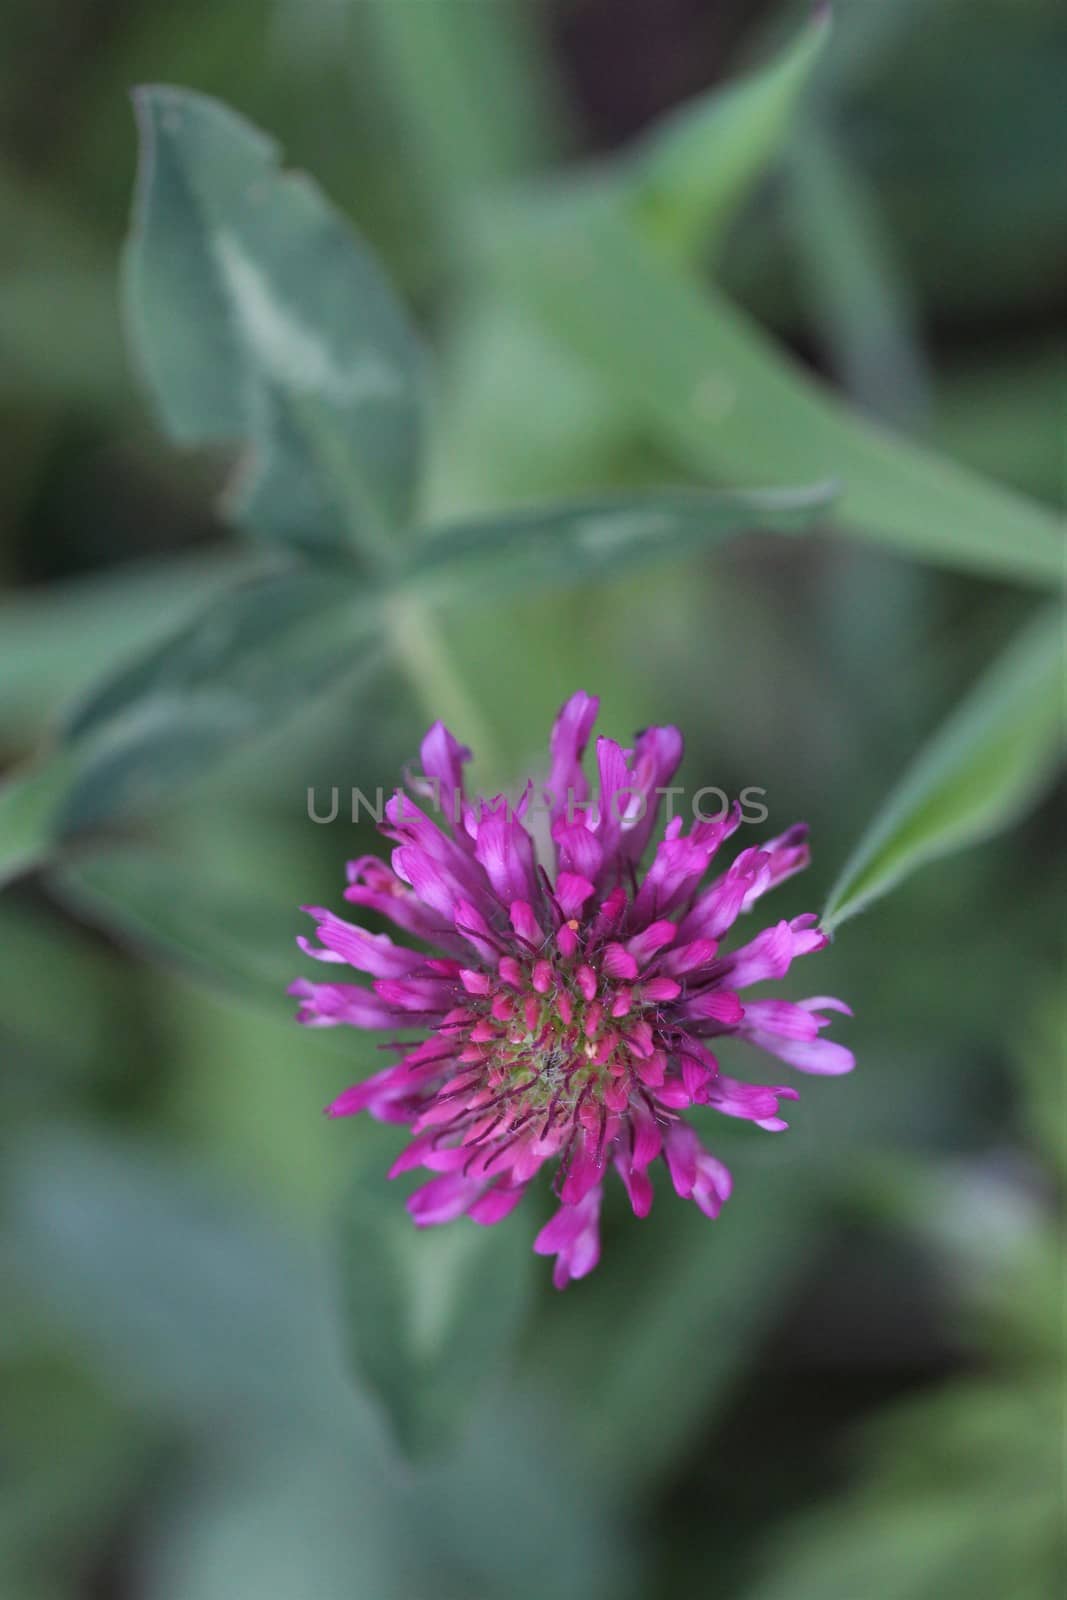 Trifolium pratense or meadow clover as close up by Luise123